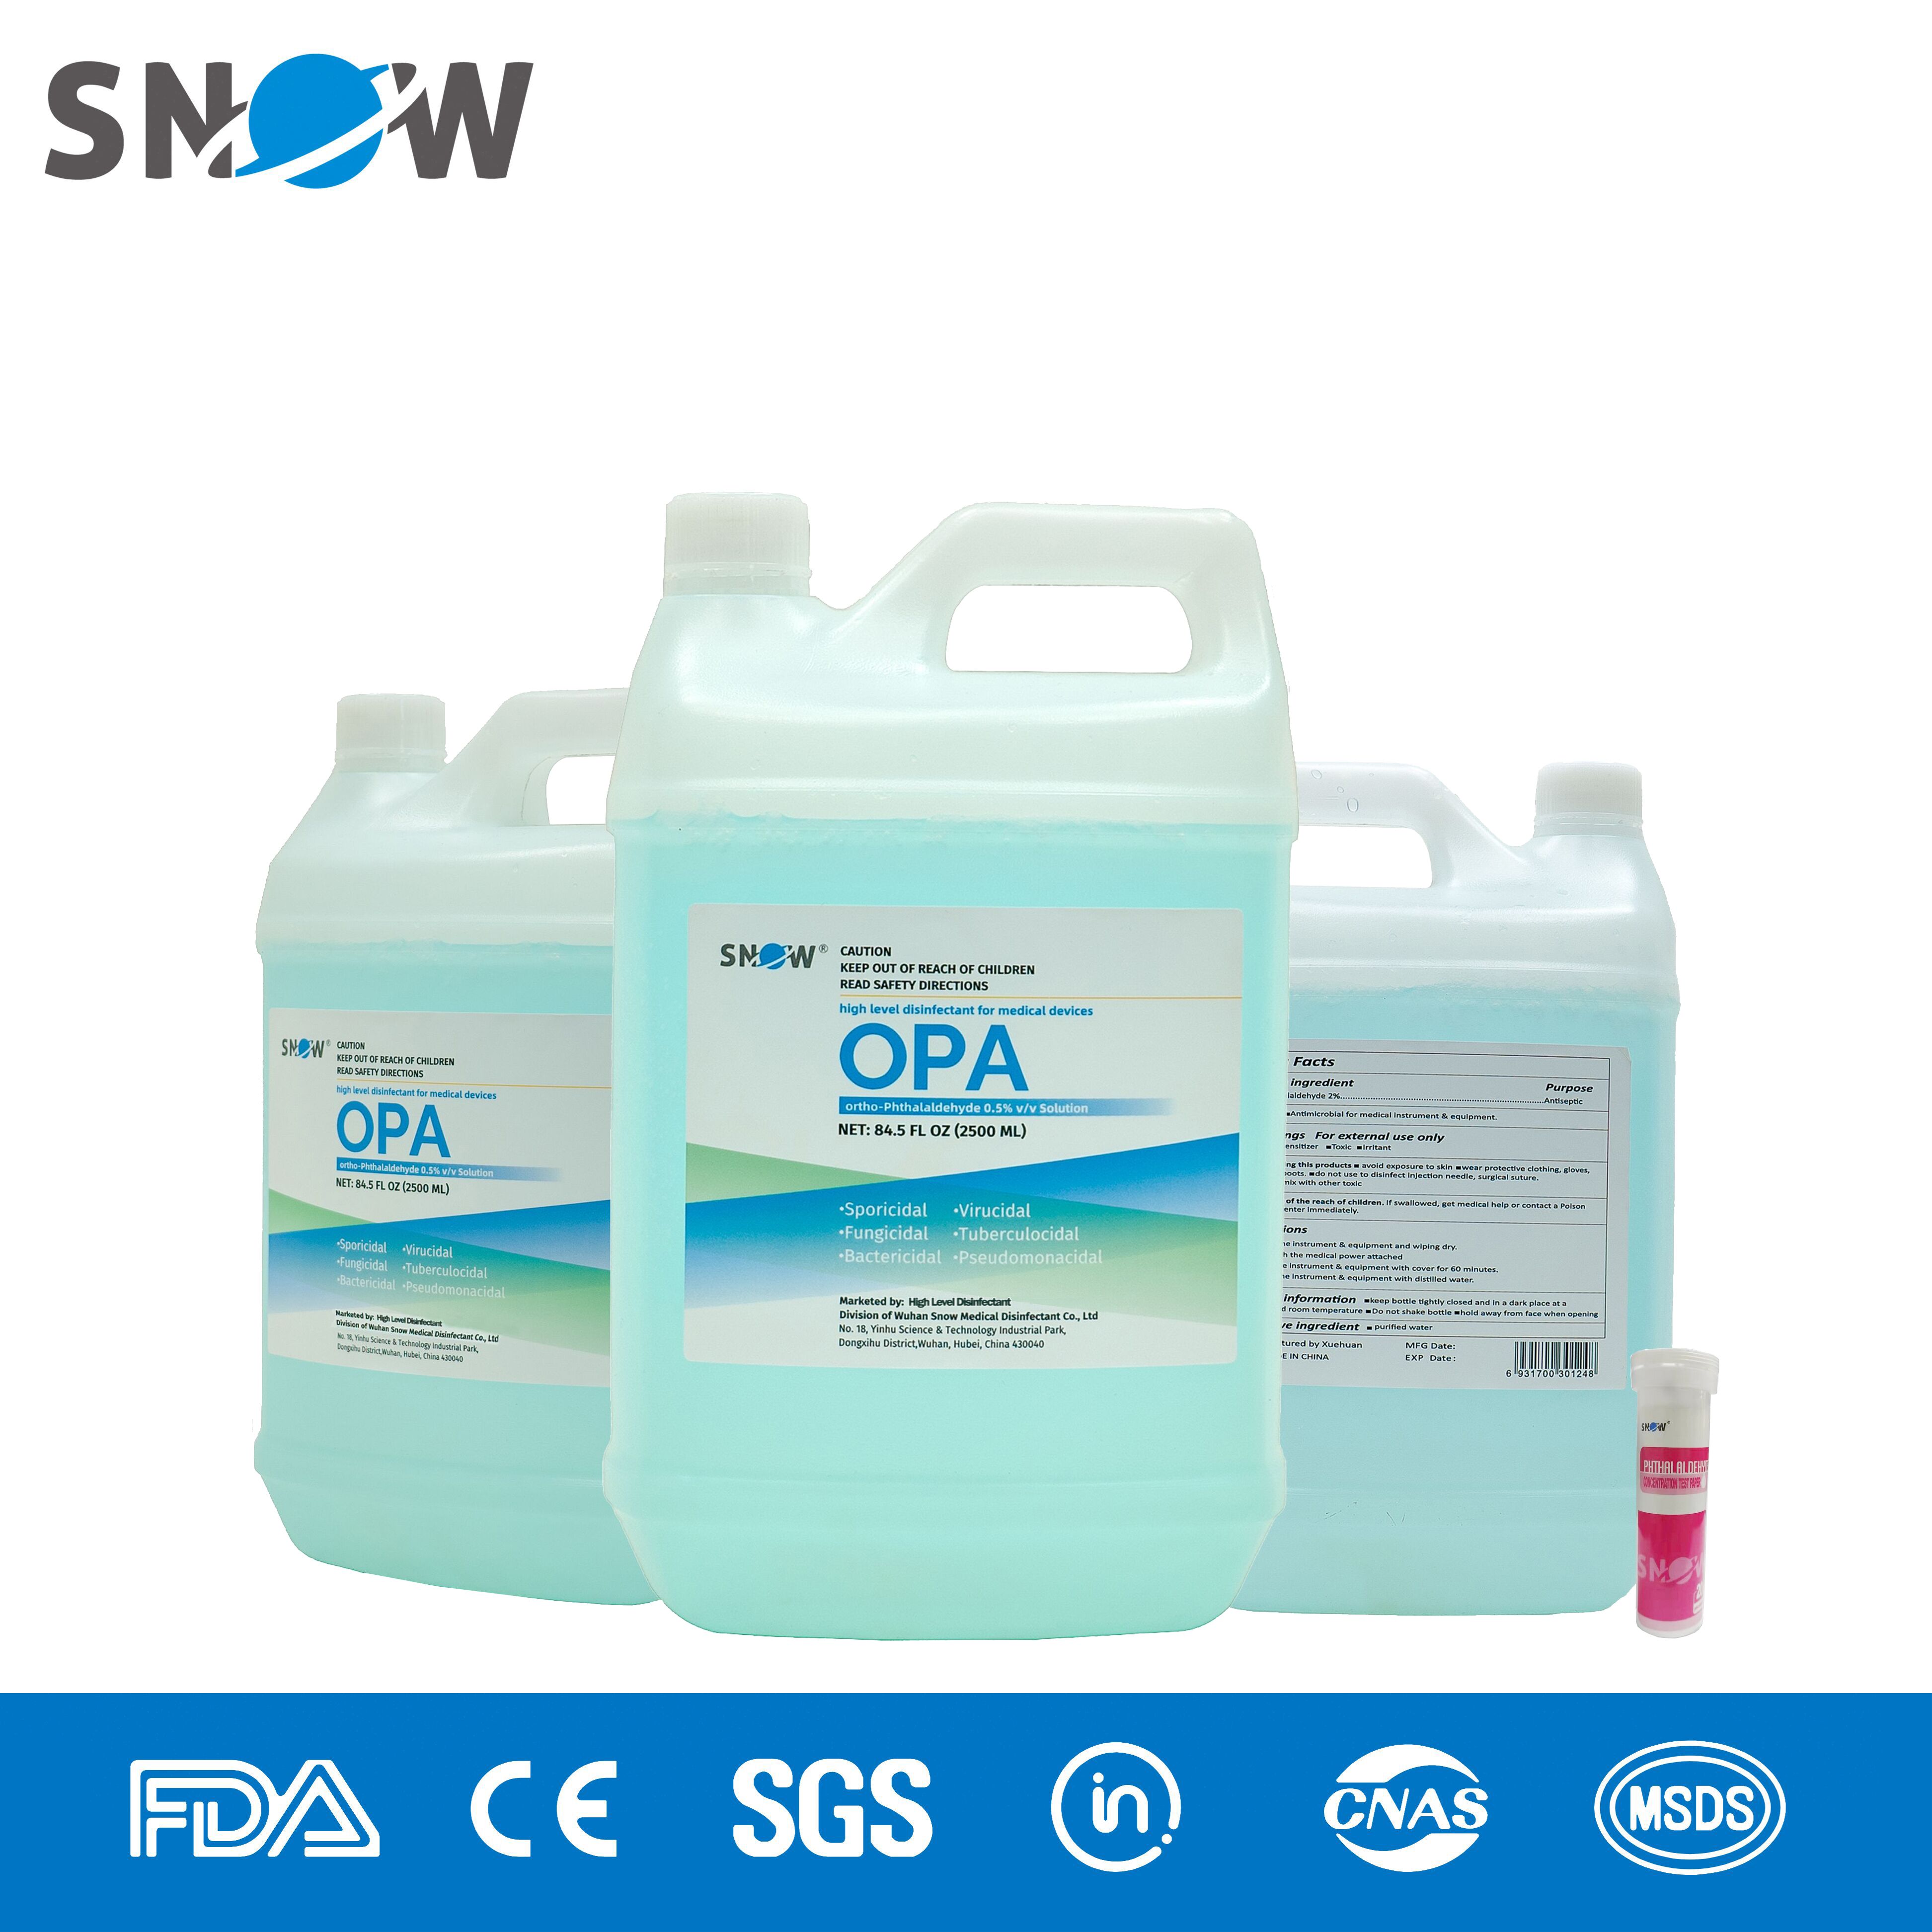 Ortho Phthalaldehyde Disinfectant for endoscope reprocessing